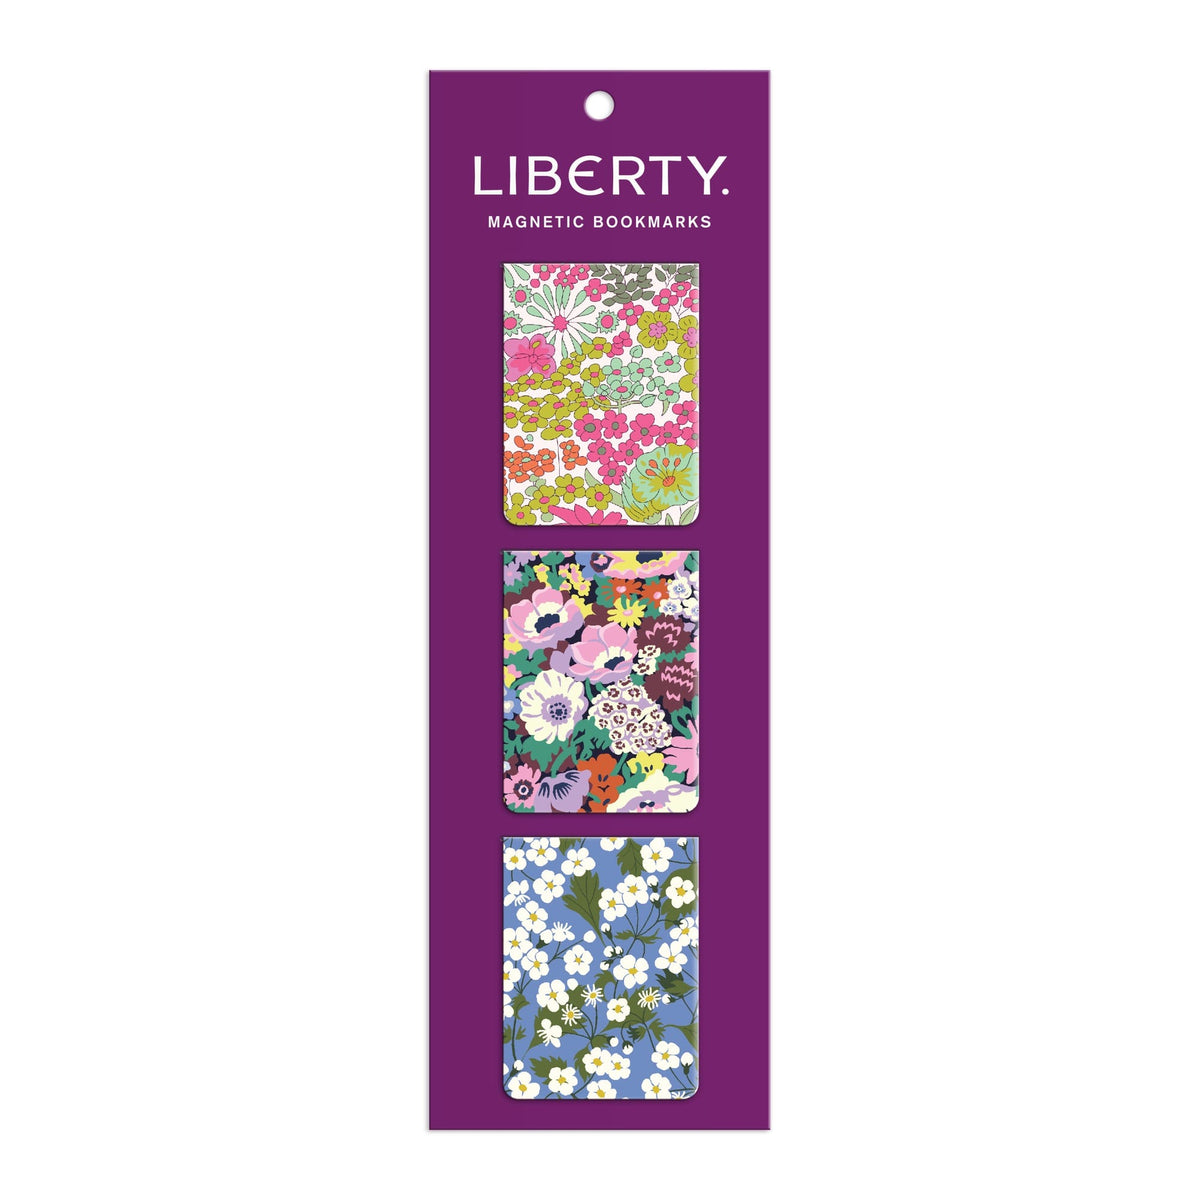 liberty-magnetic-bookmarks-bookmarks-liberty-of-london-ltd-984388